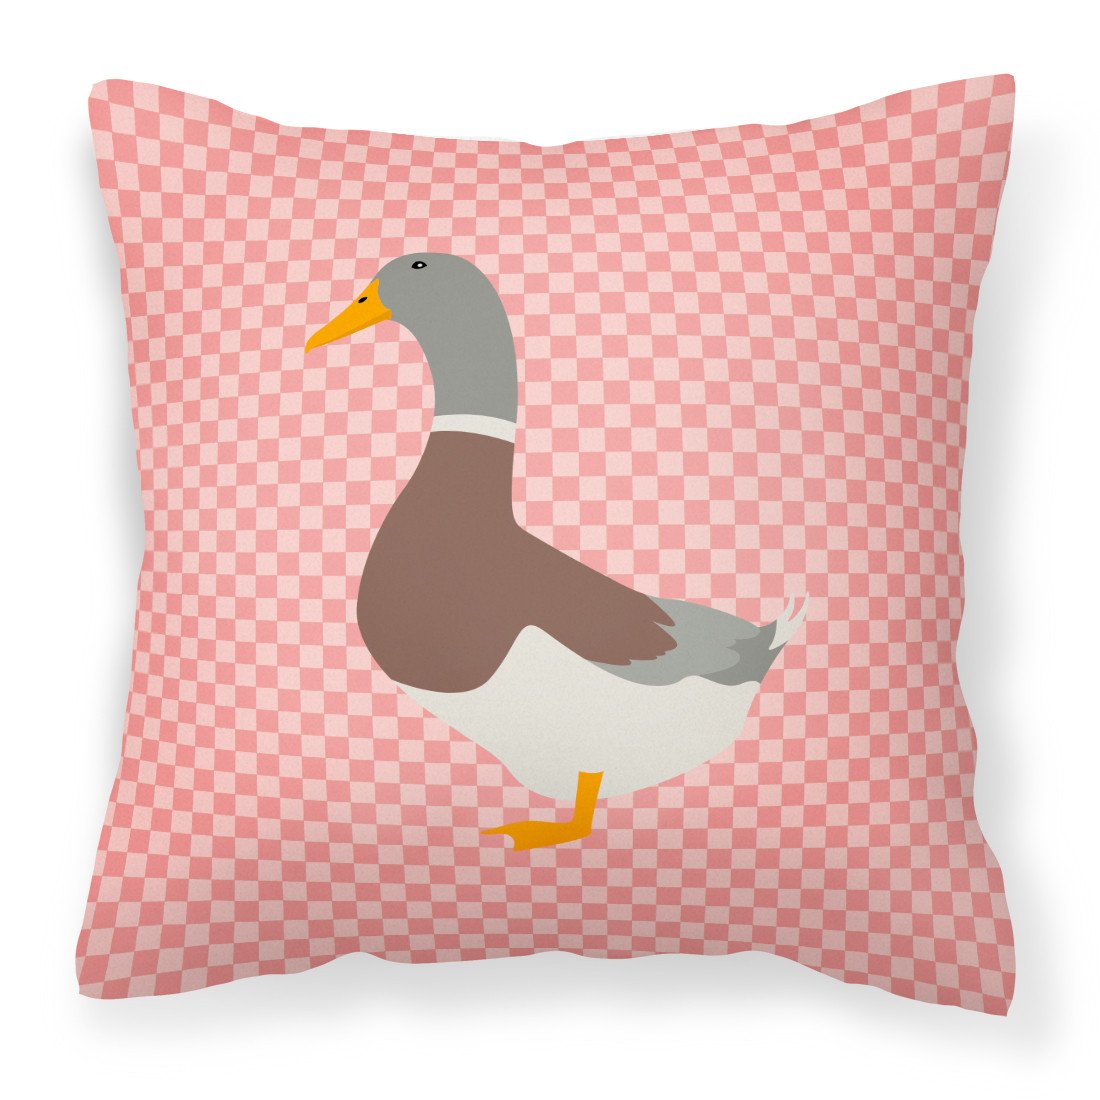 Saxony Sachsenente Duck Pink Check Fabric Decorative Pillow BB7863PW1818 by Caroline's Treasures